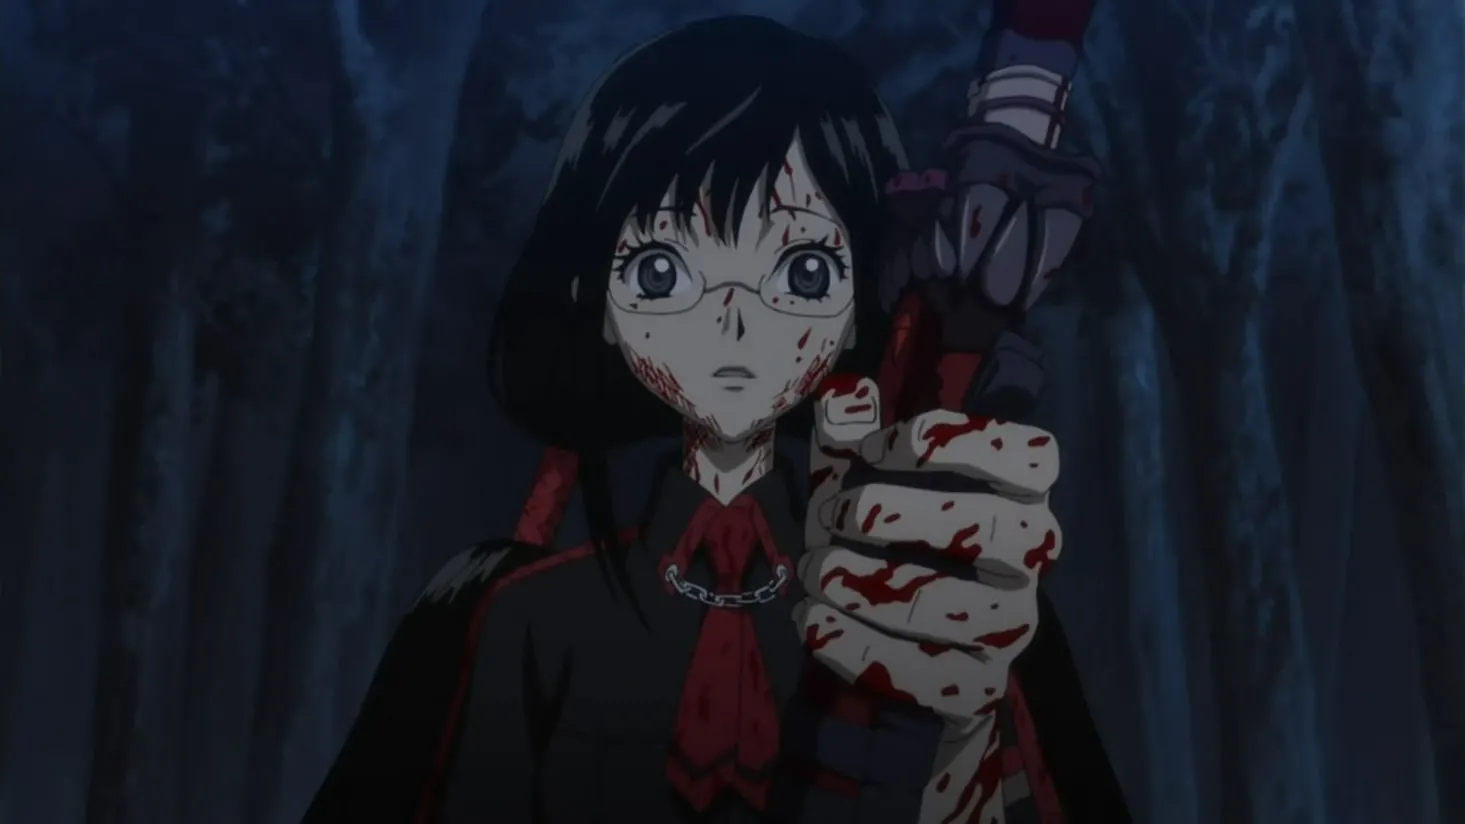 “Saya... you’ve, uh... you’ve got some... blood... on you.” “Don’t worry, this happens all the time. This show is called Blood, you know. It’d be weird if I was splattered in other bodily fluids, right? Wrong genre.”